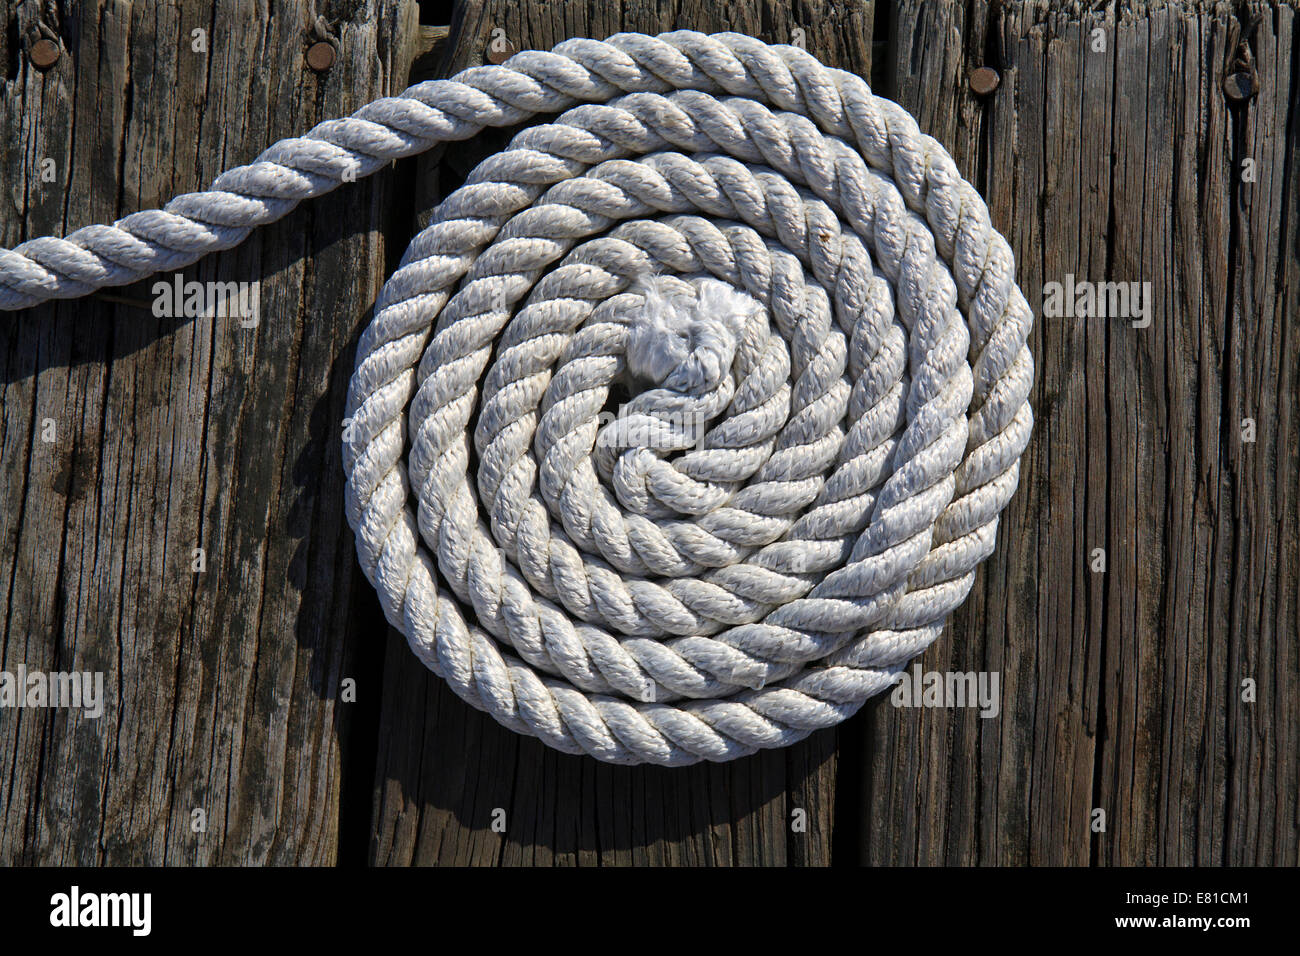 Rope curled into circles on a dock. Stock Photo